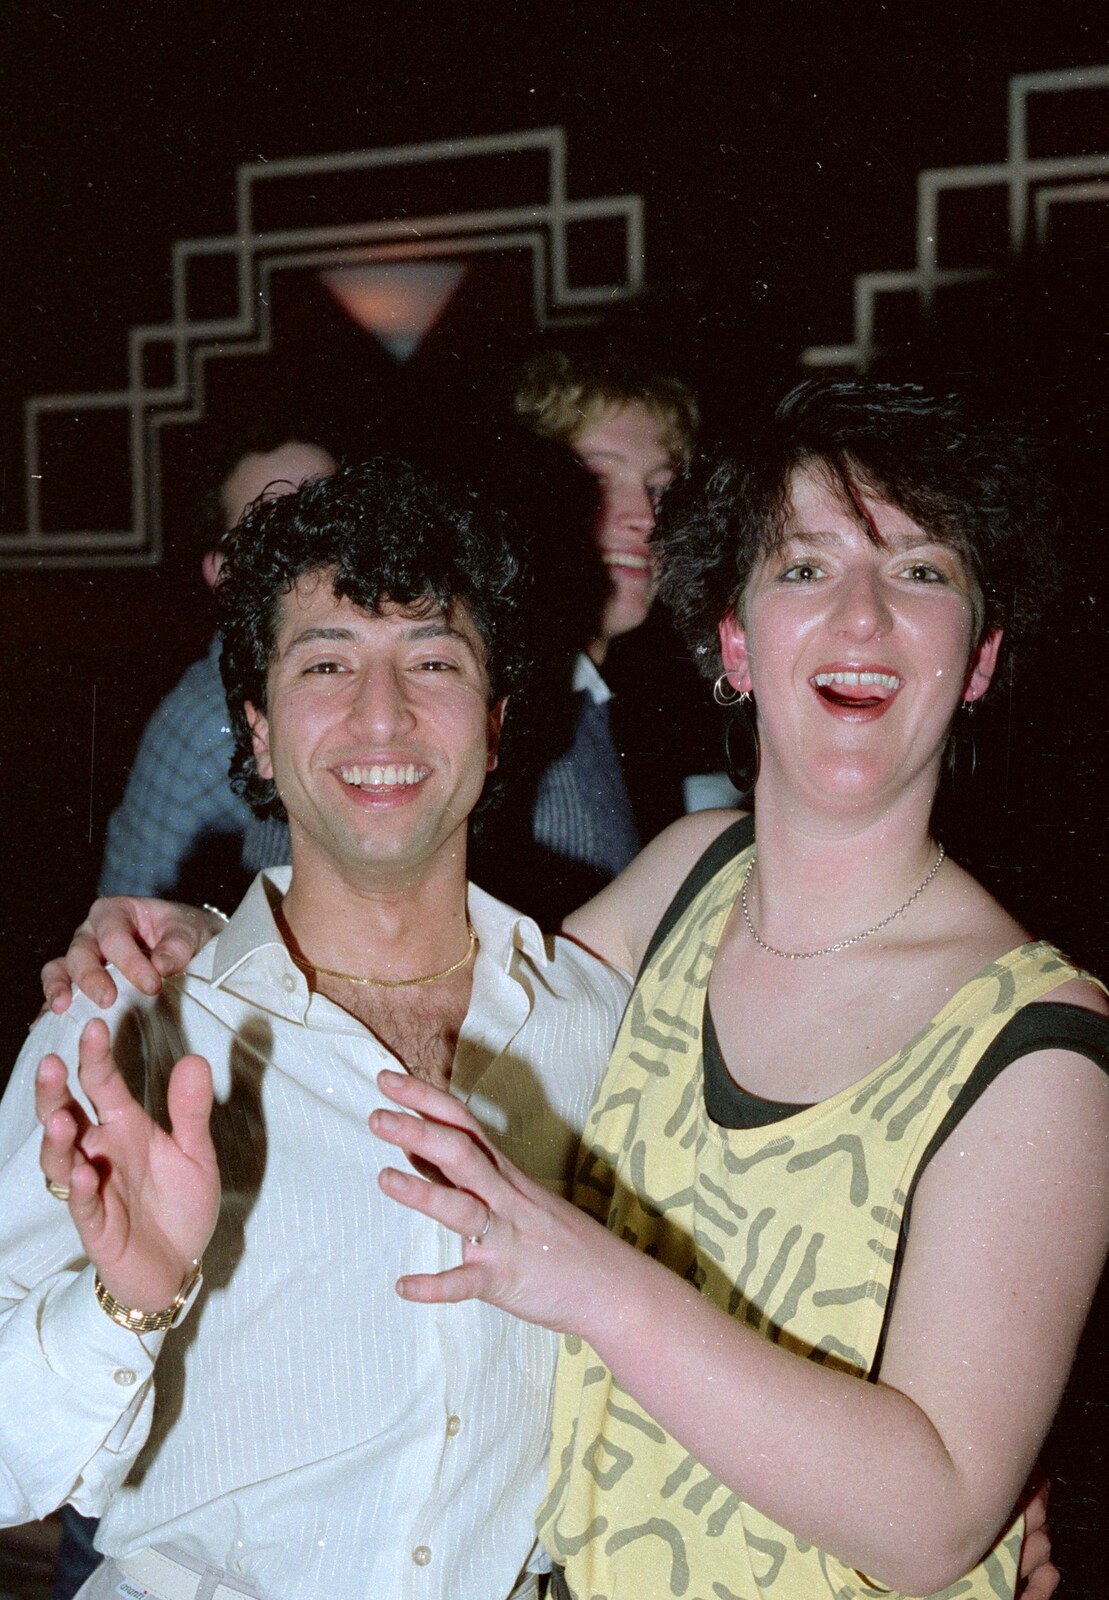 A bit of waving from Uni: A Party in Snobs Nightclub, Mayflower Street, Plymouth - 18th October 1986